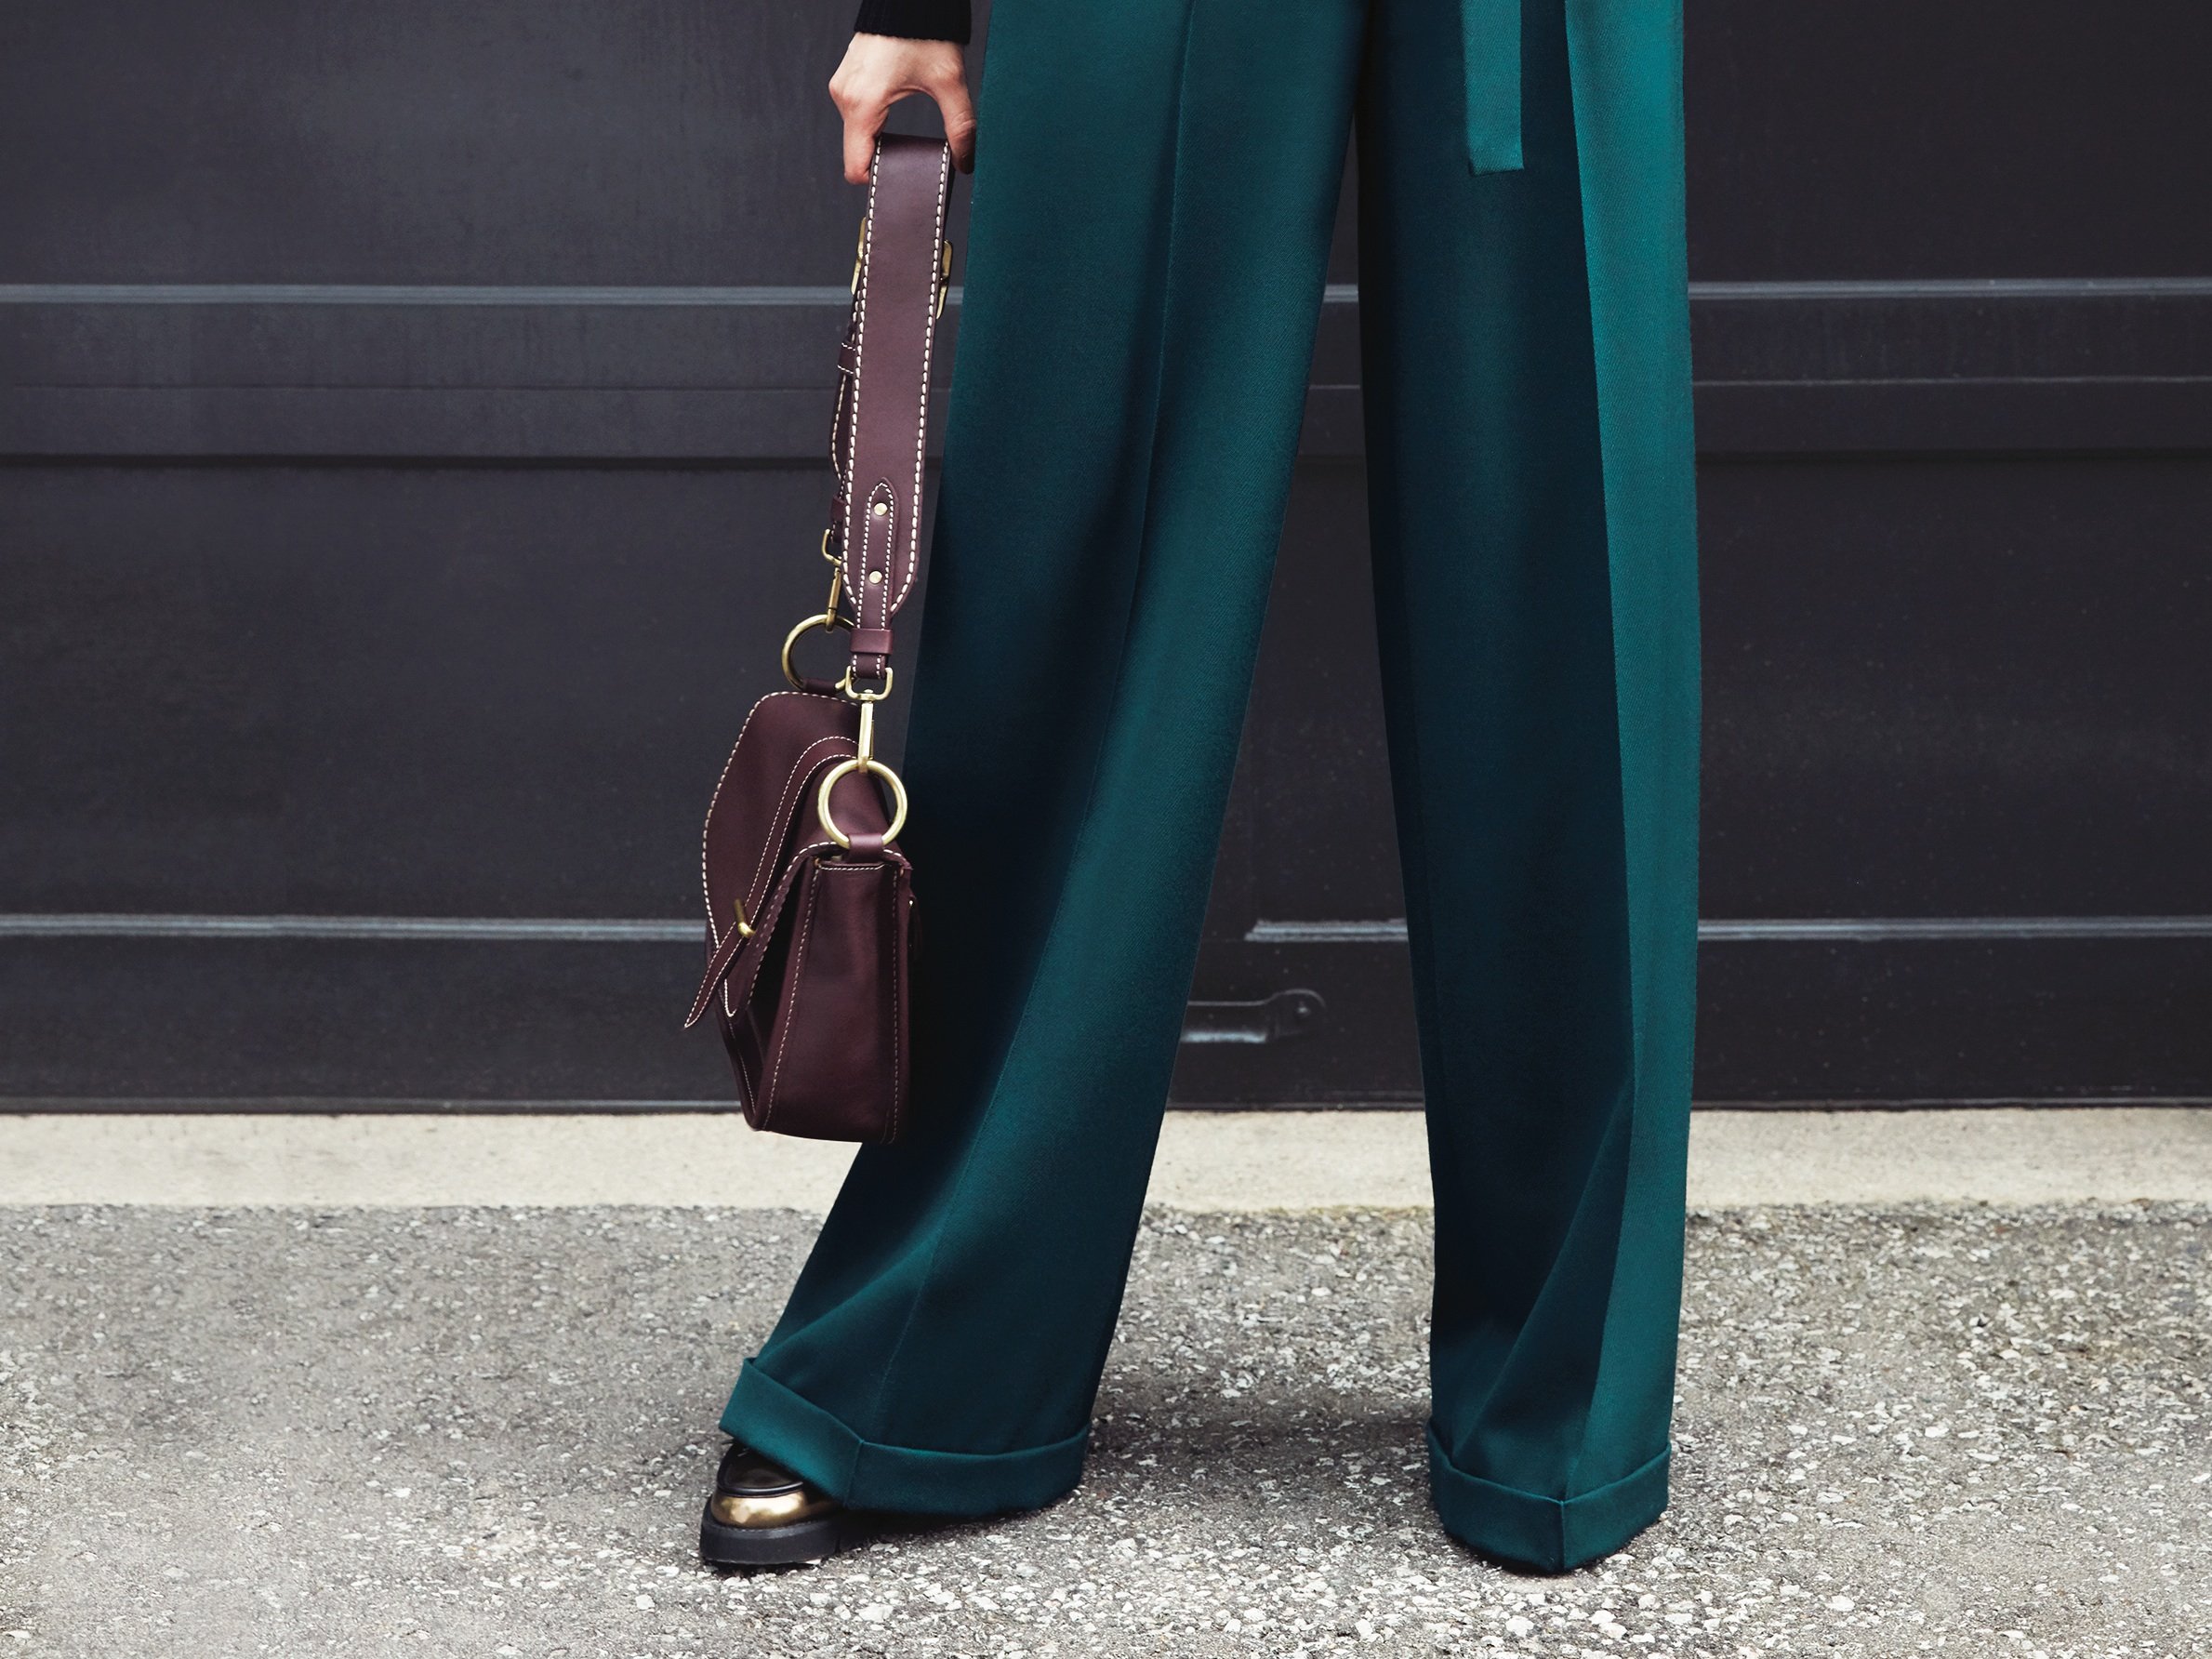 Petite wide-leg pants. Wide-legged pants can be a challenging look for petites. Here's how to pull the trend of